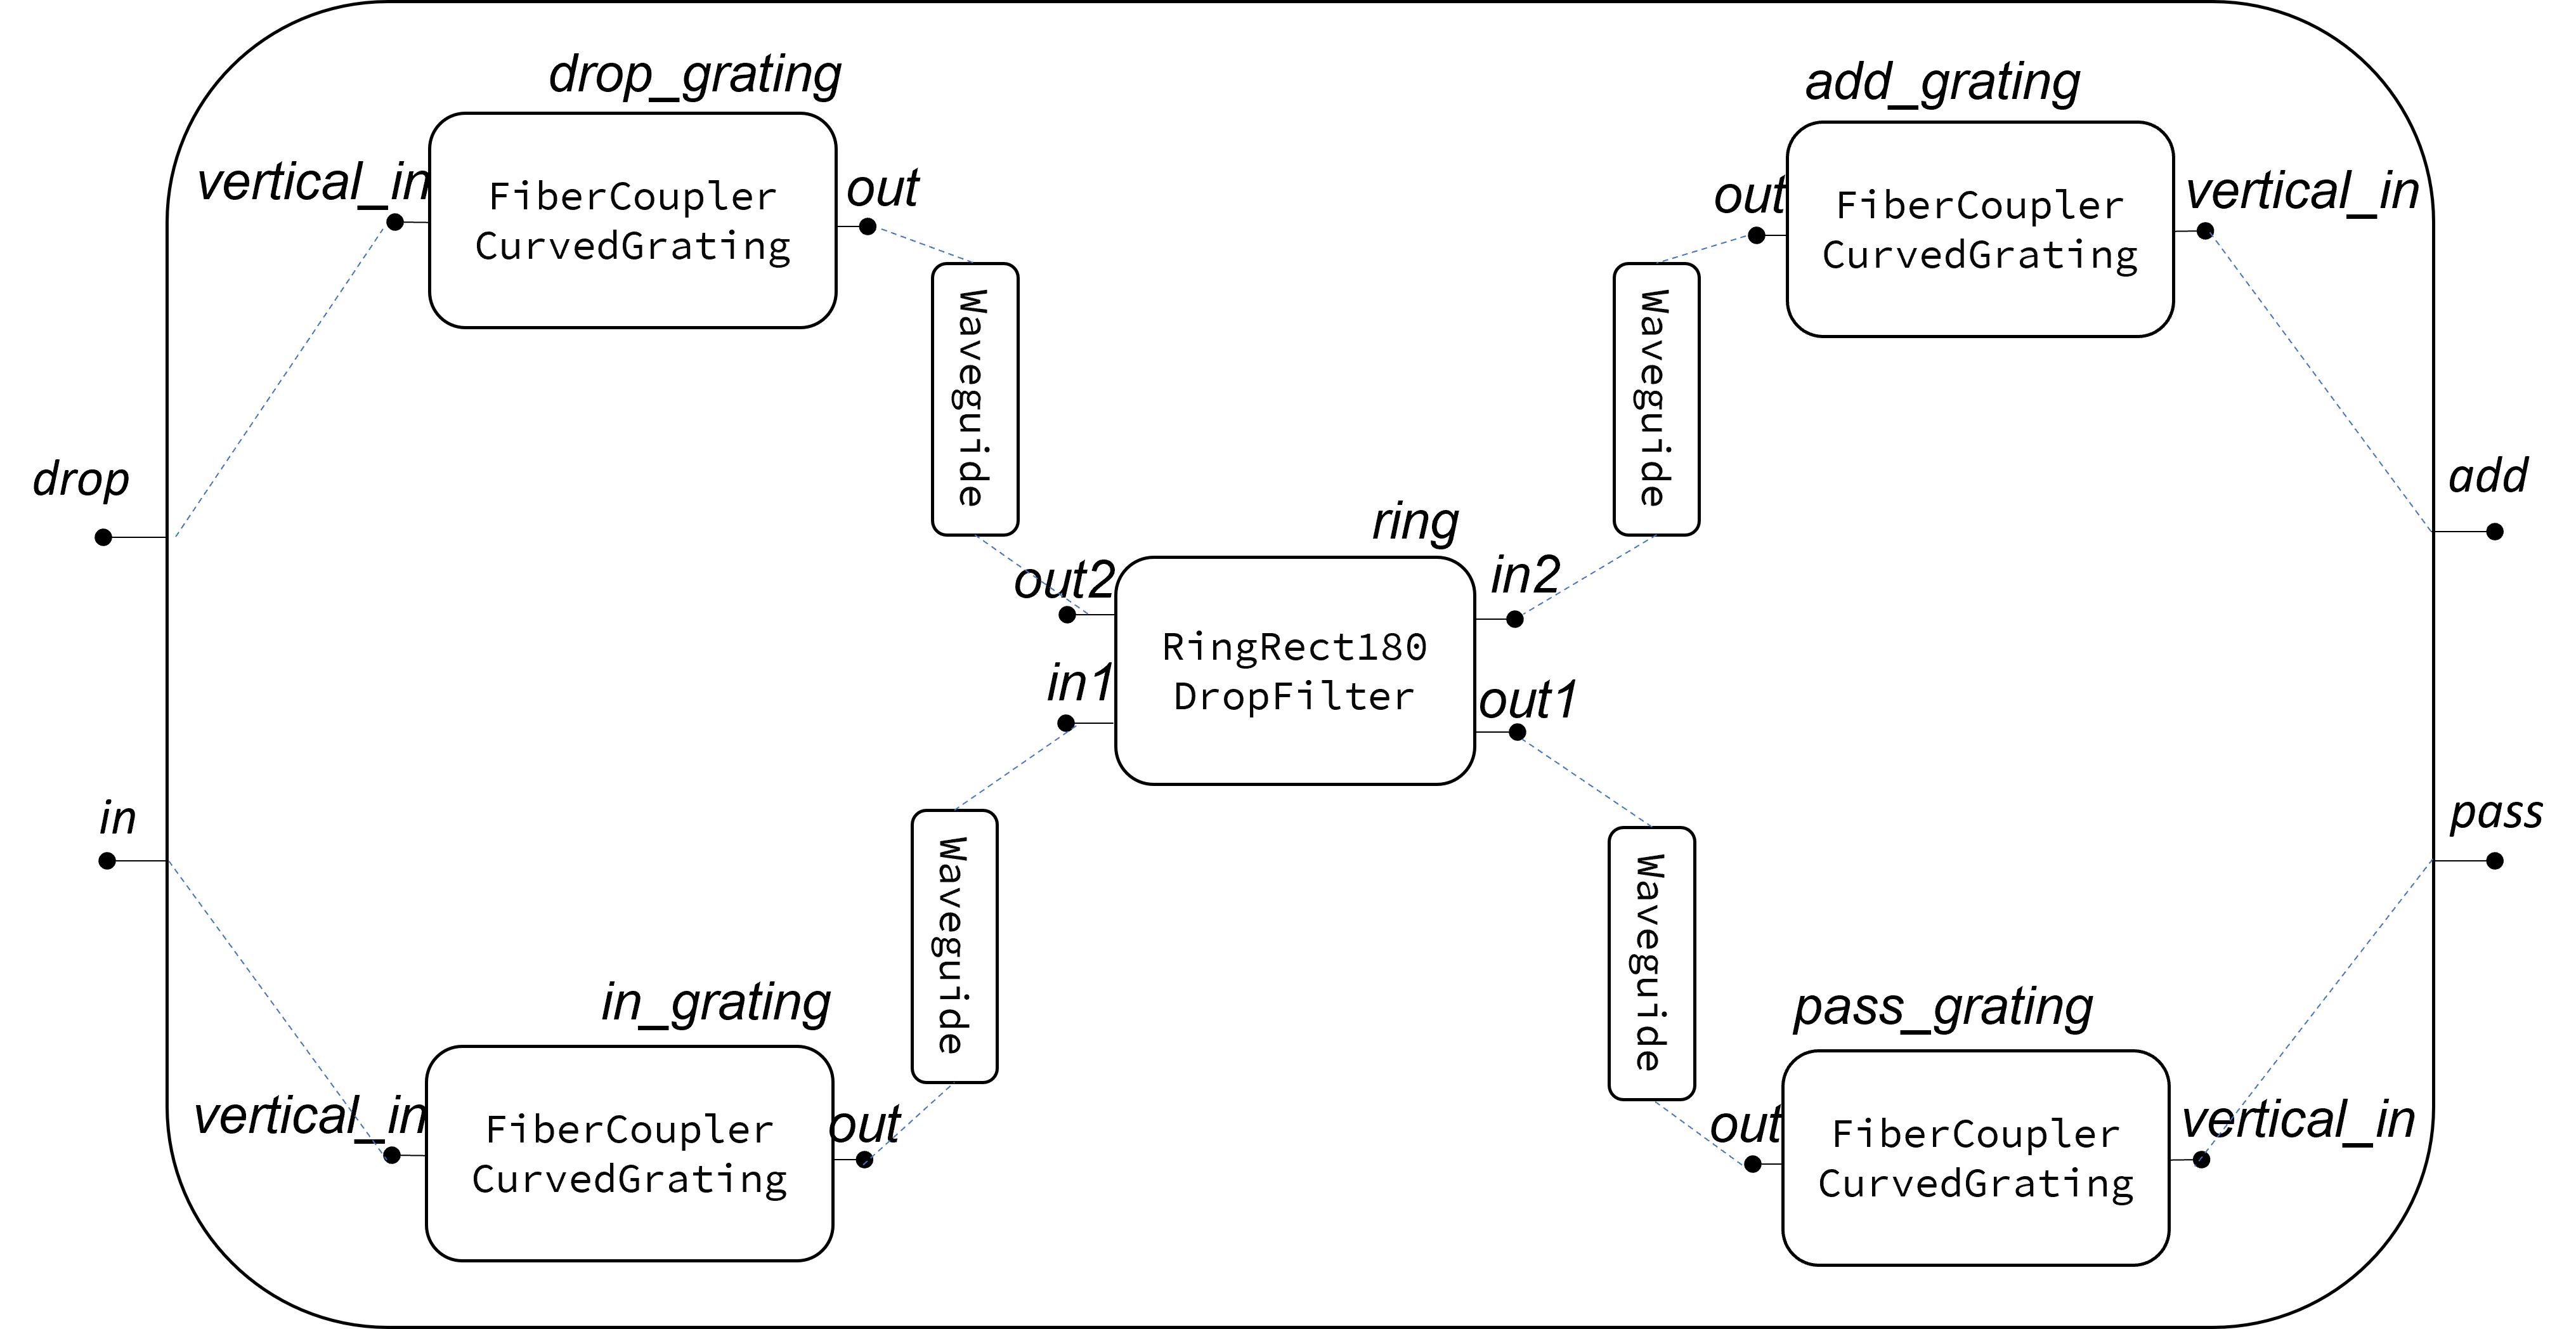 Example circuit consisting of a ring resonator and 4 grating couplers